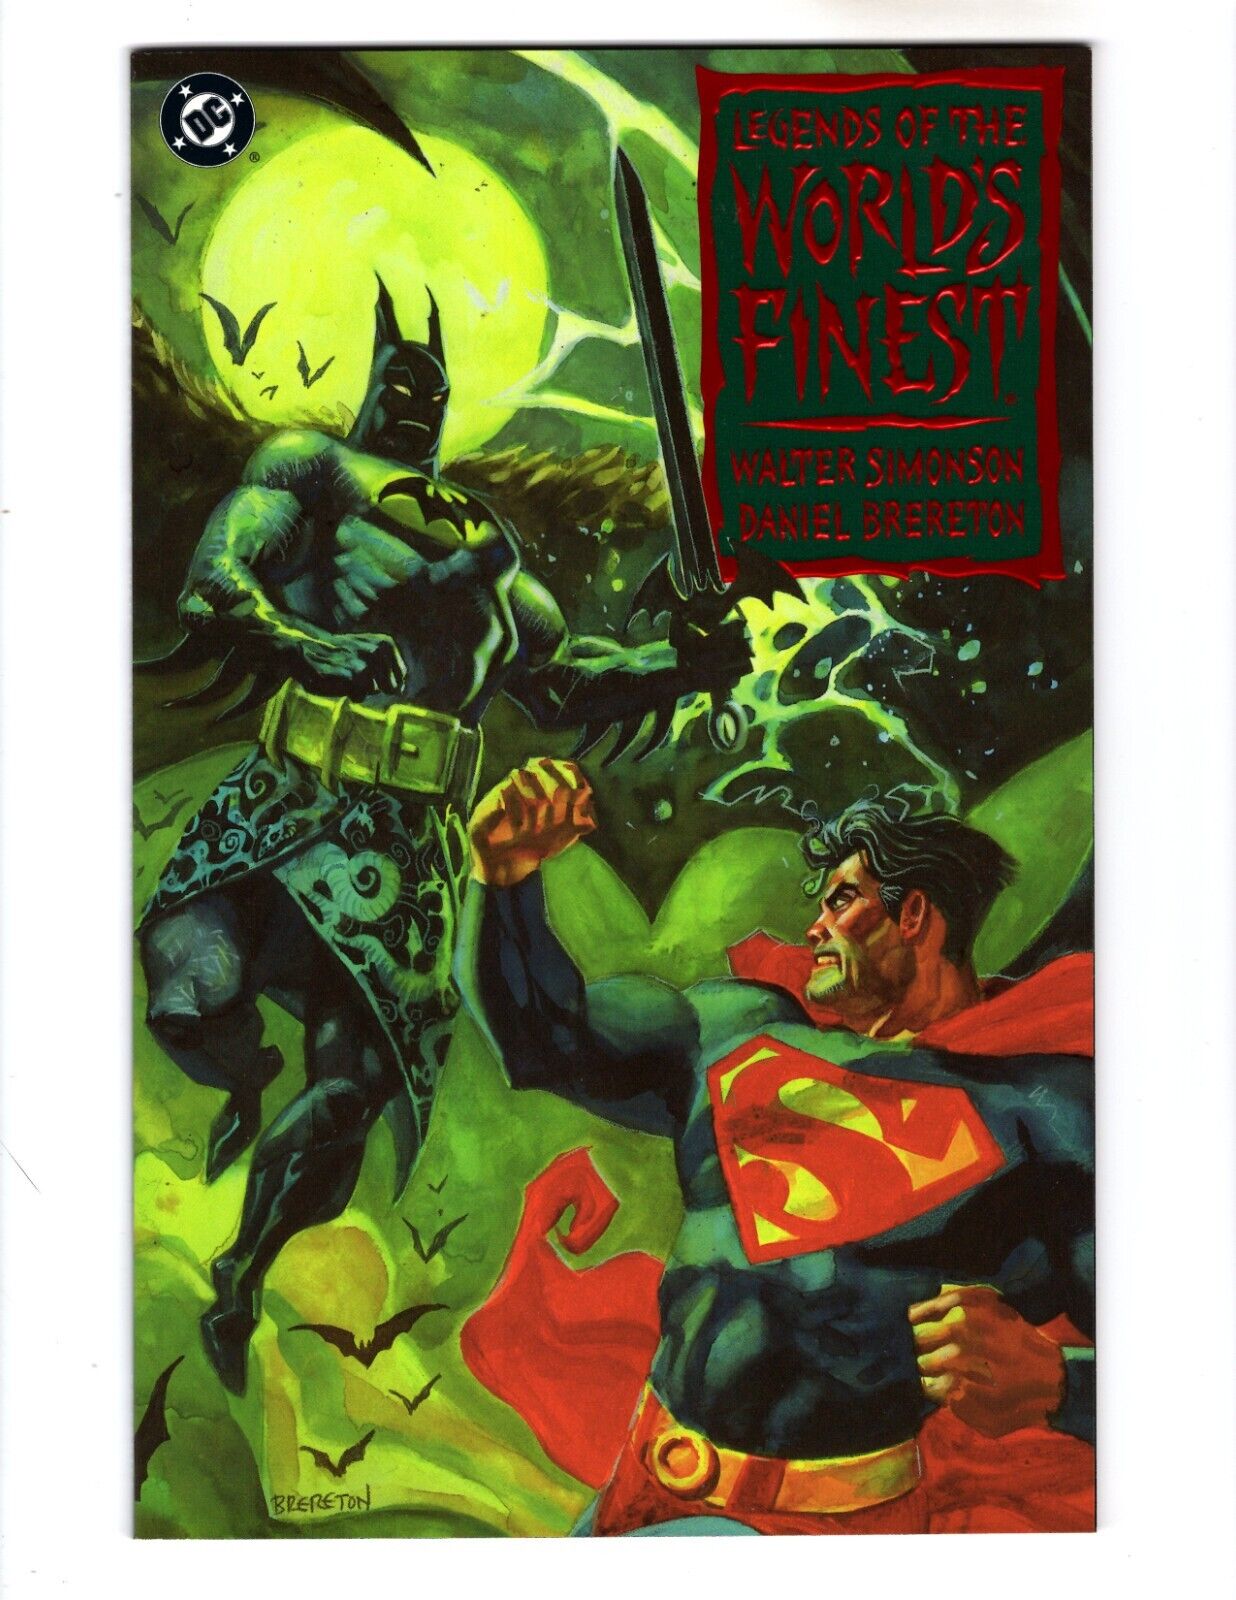 LEGENDS OF THE WORLD'S FINEST #3 (VF) [1994 DC COMICS] PAINTED ART